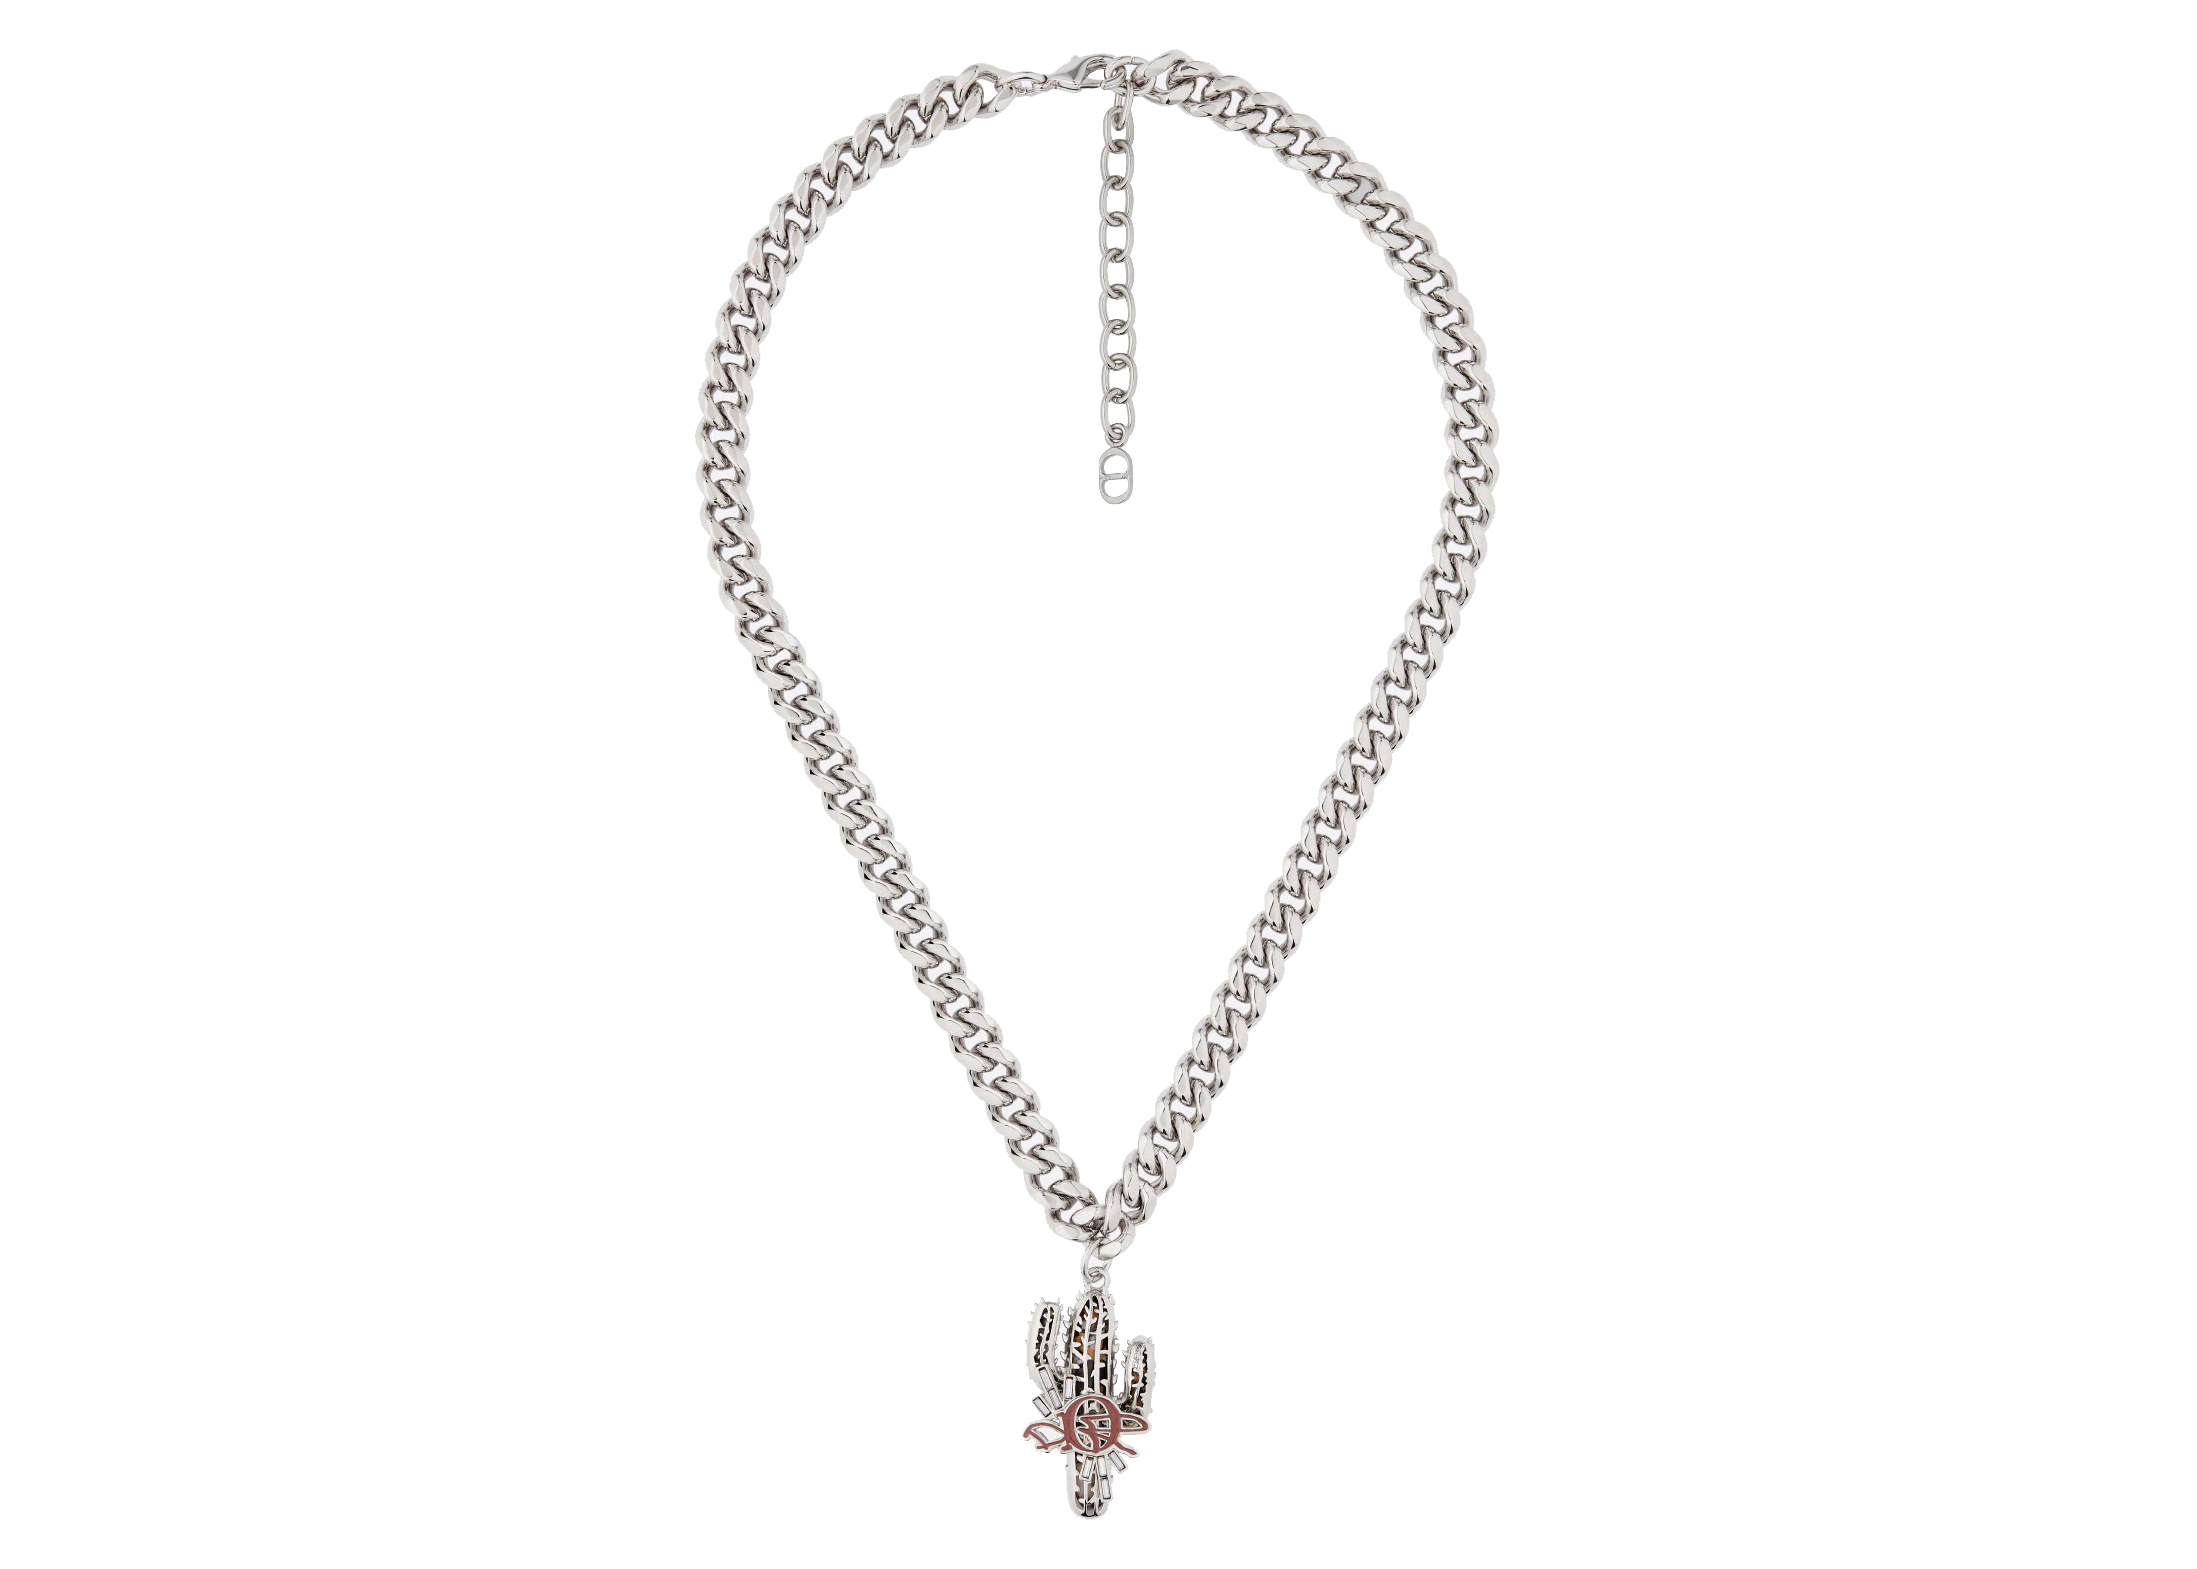 Dior x CACTUS JACK Chain Link Necklace Silver/Beige in Silver